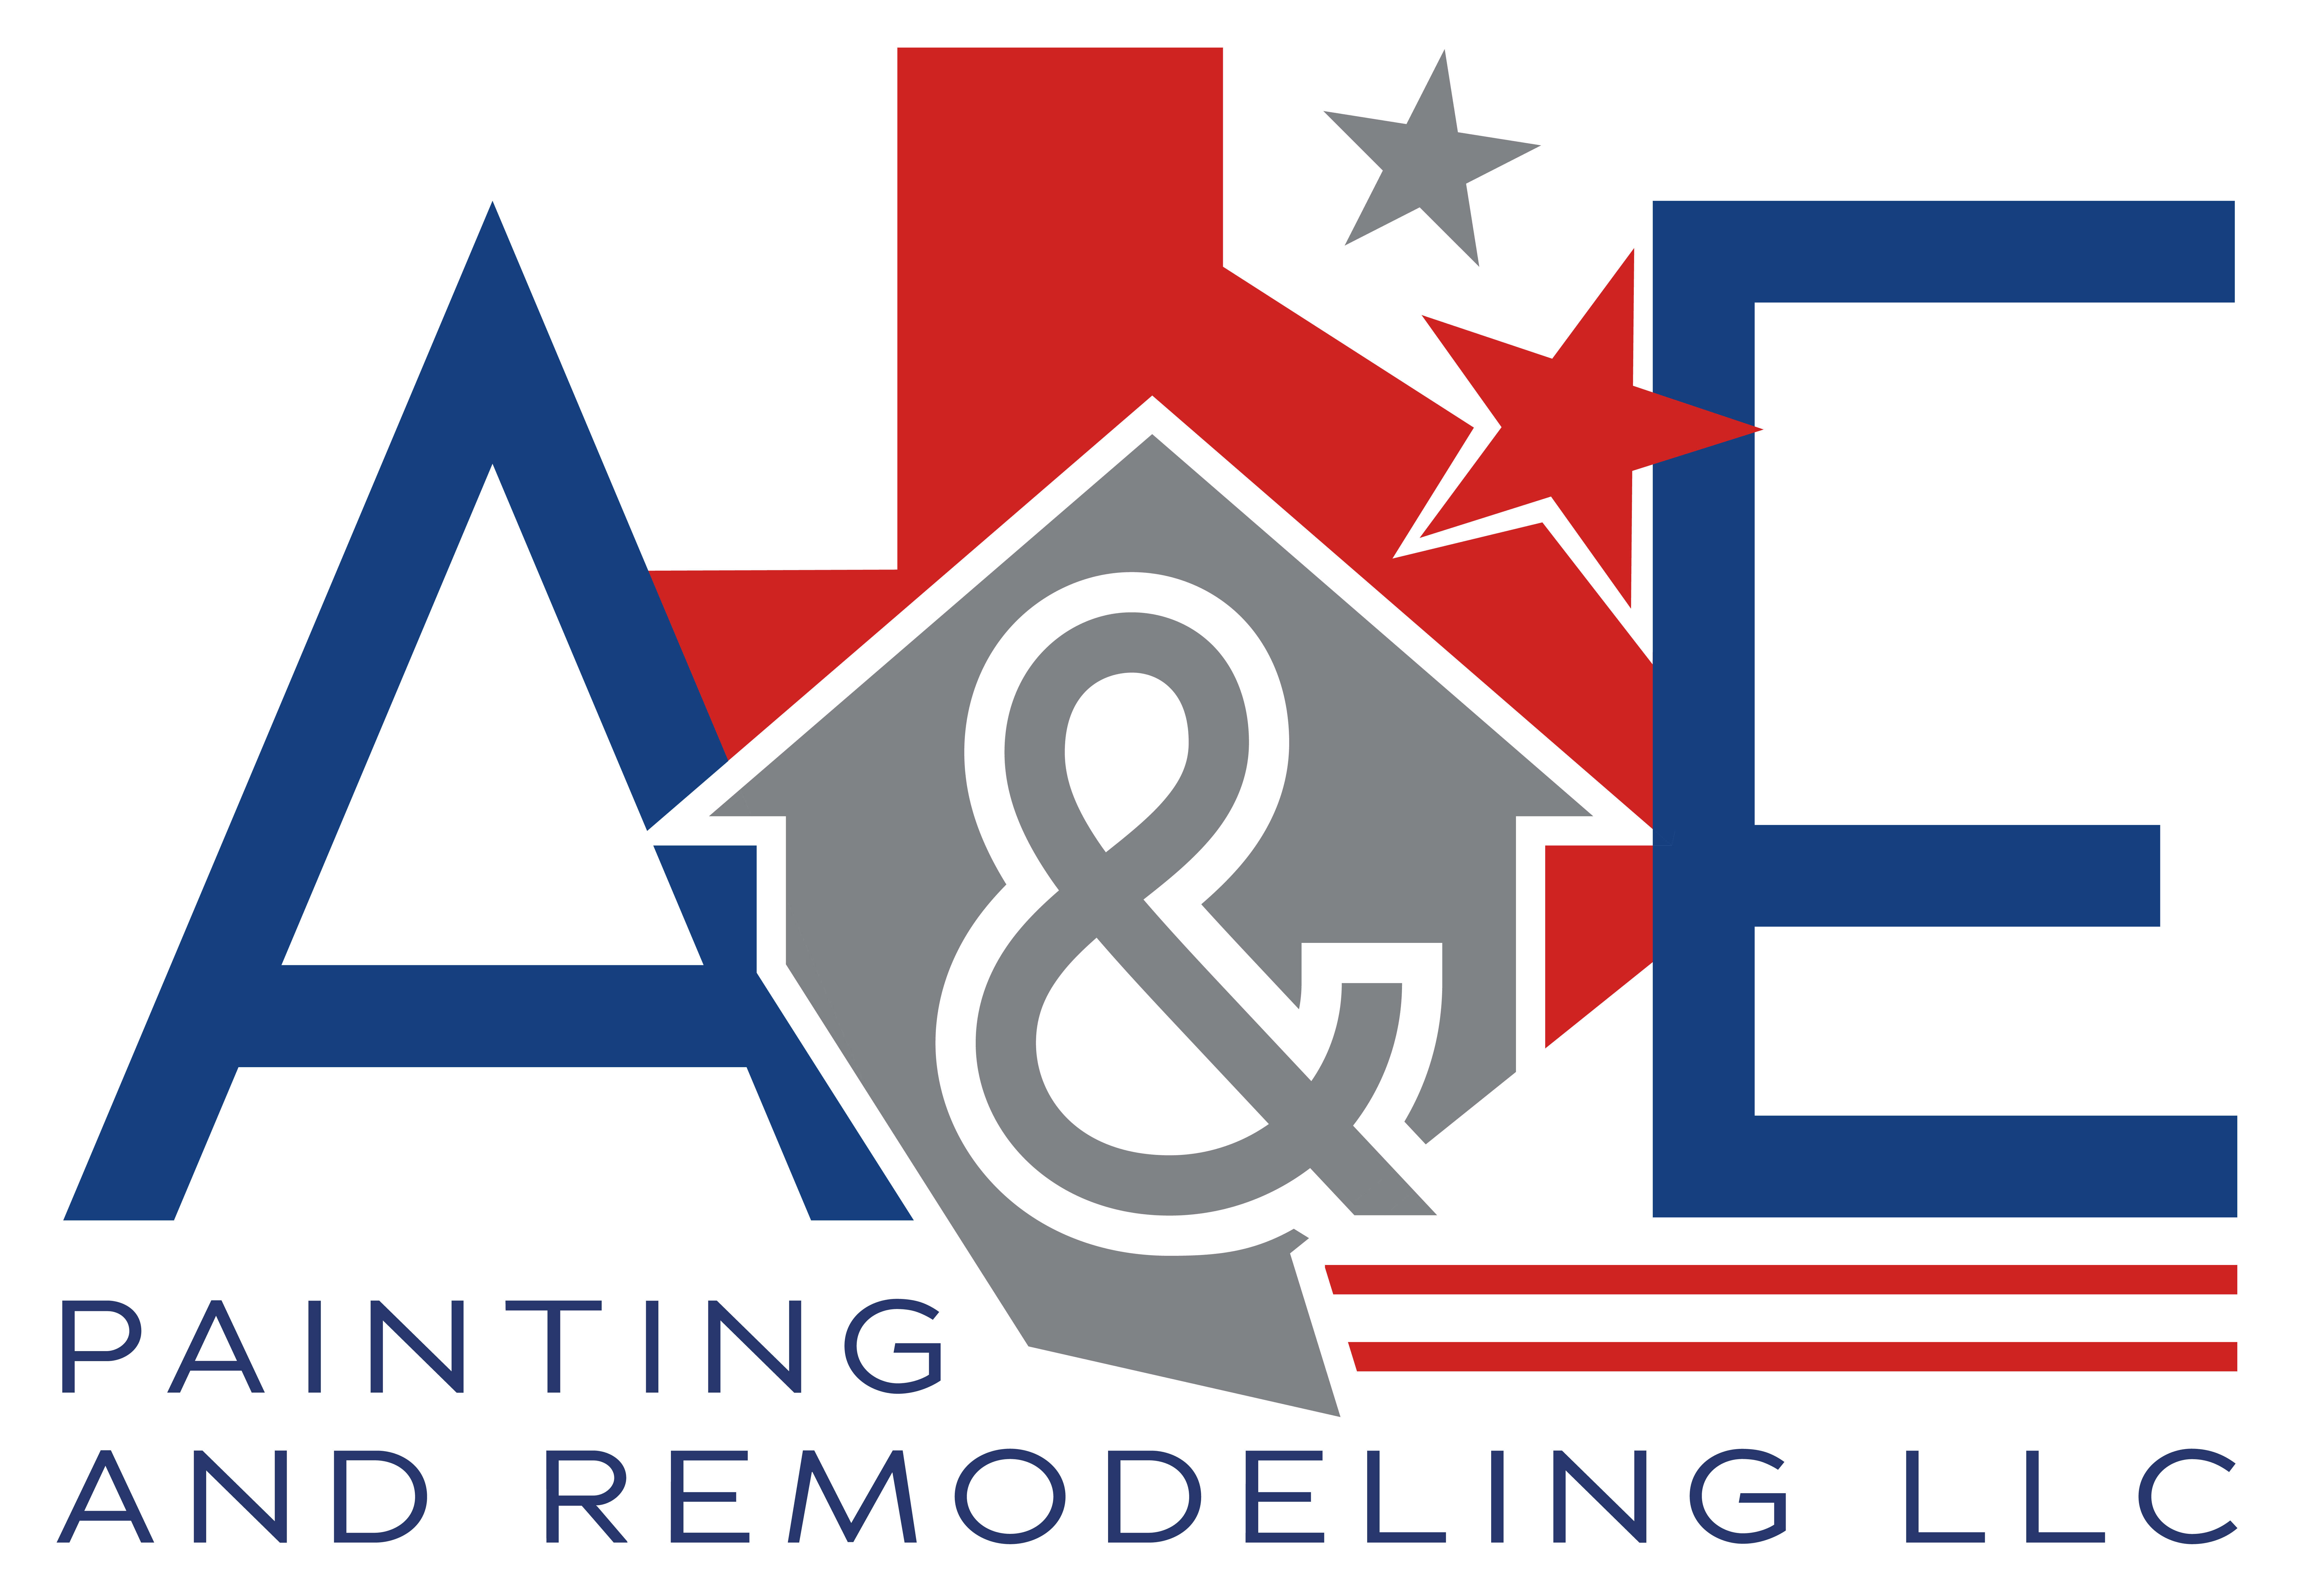 A & E Painting and Remodeling LLC Logo